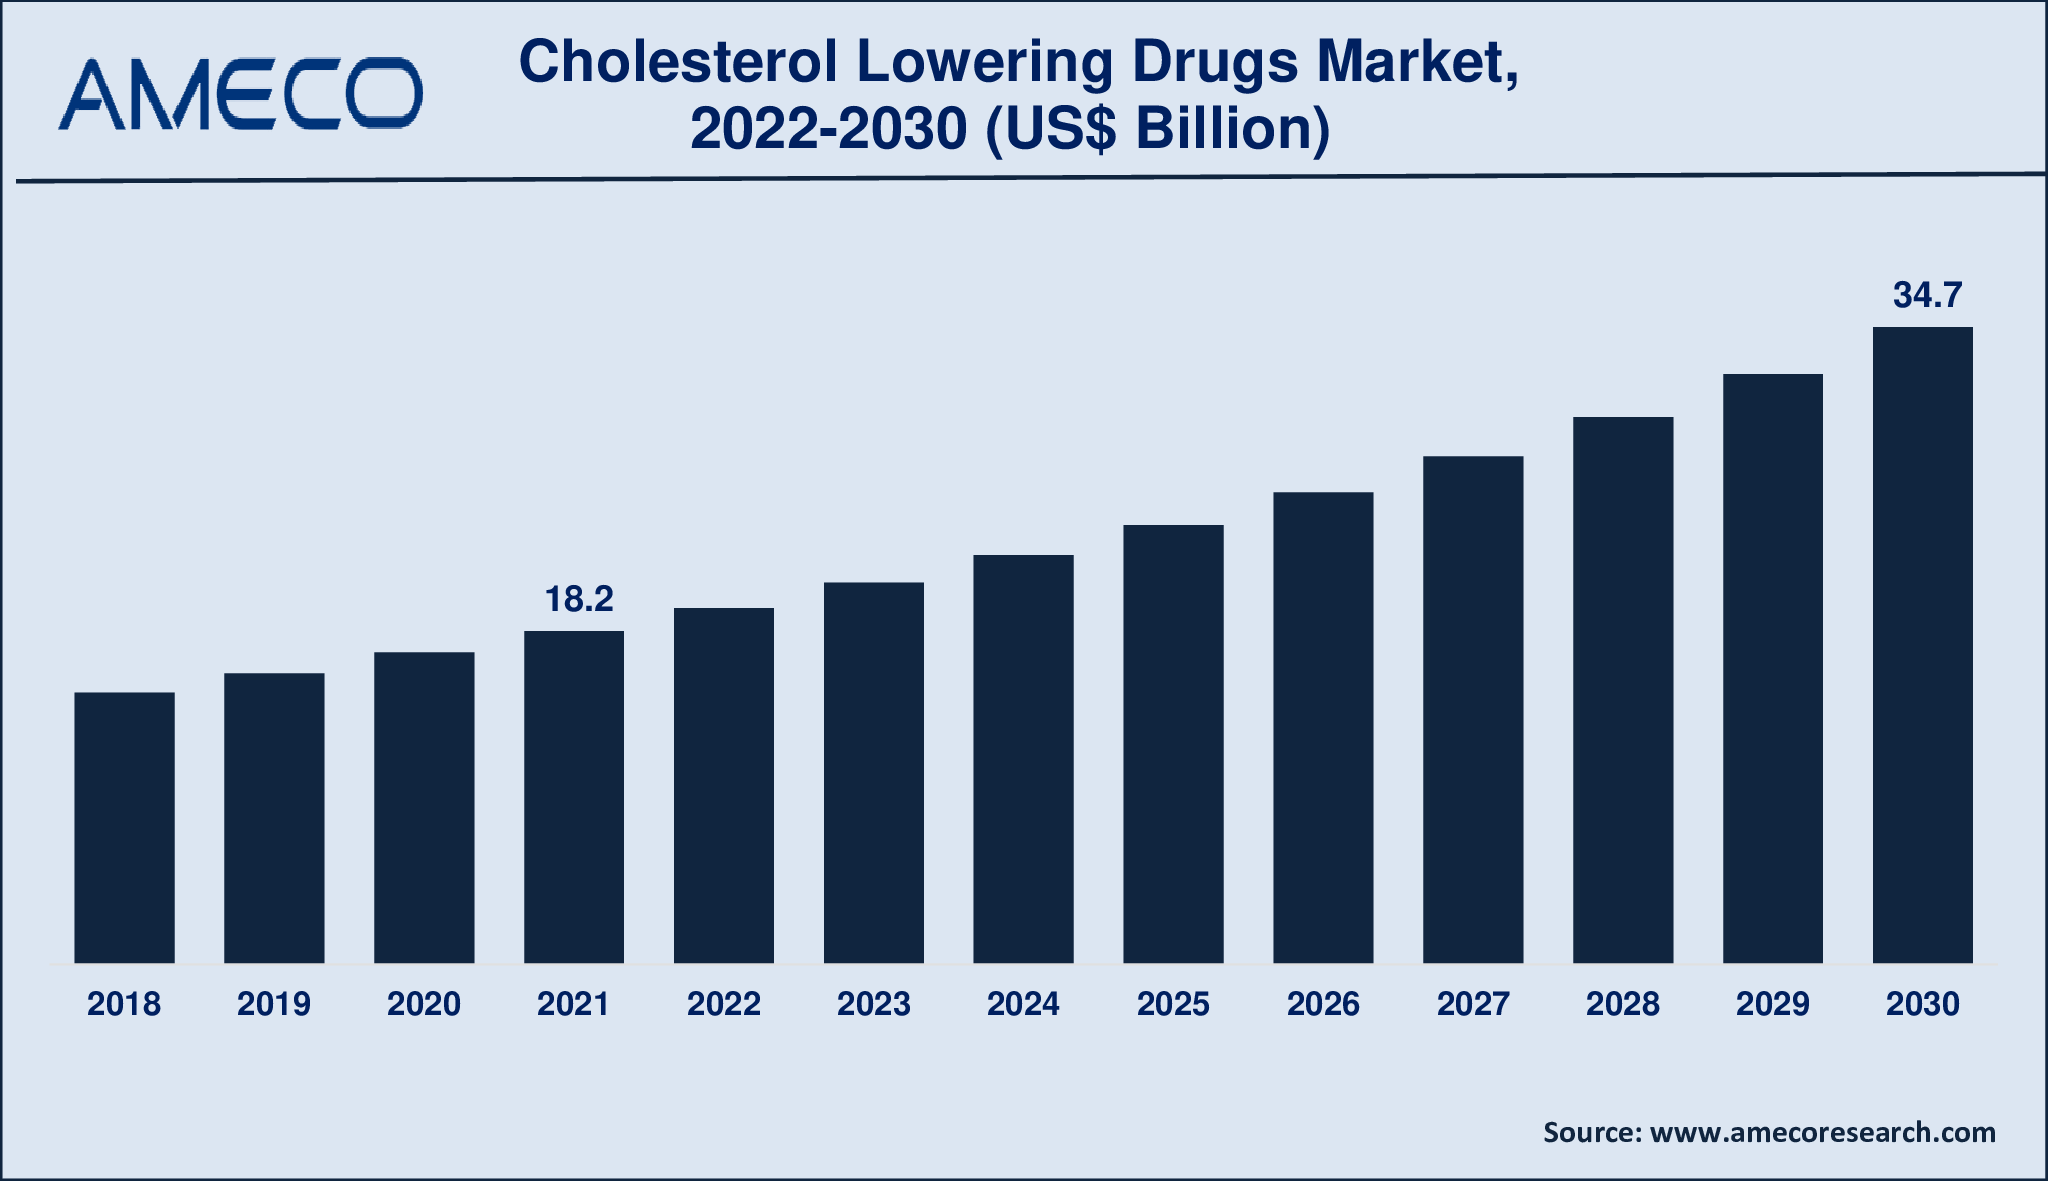 Cholesterol Lowering Drugs Market Size, Share, Growth, Trends, and Forecast 2022-2030